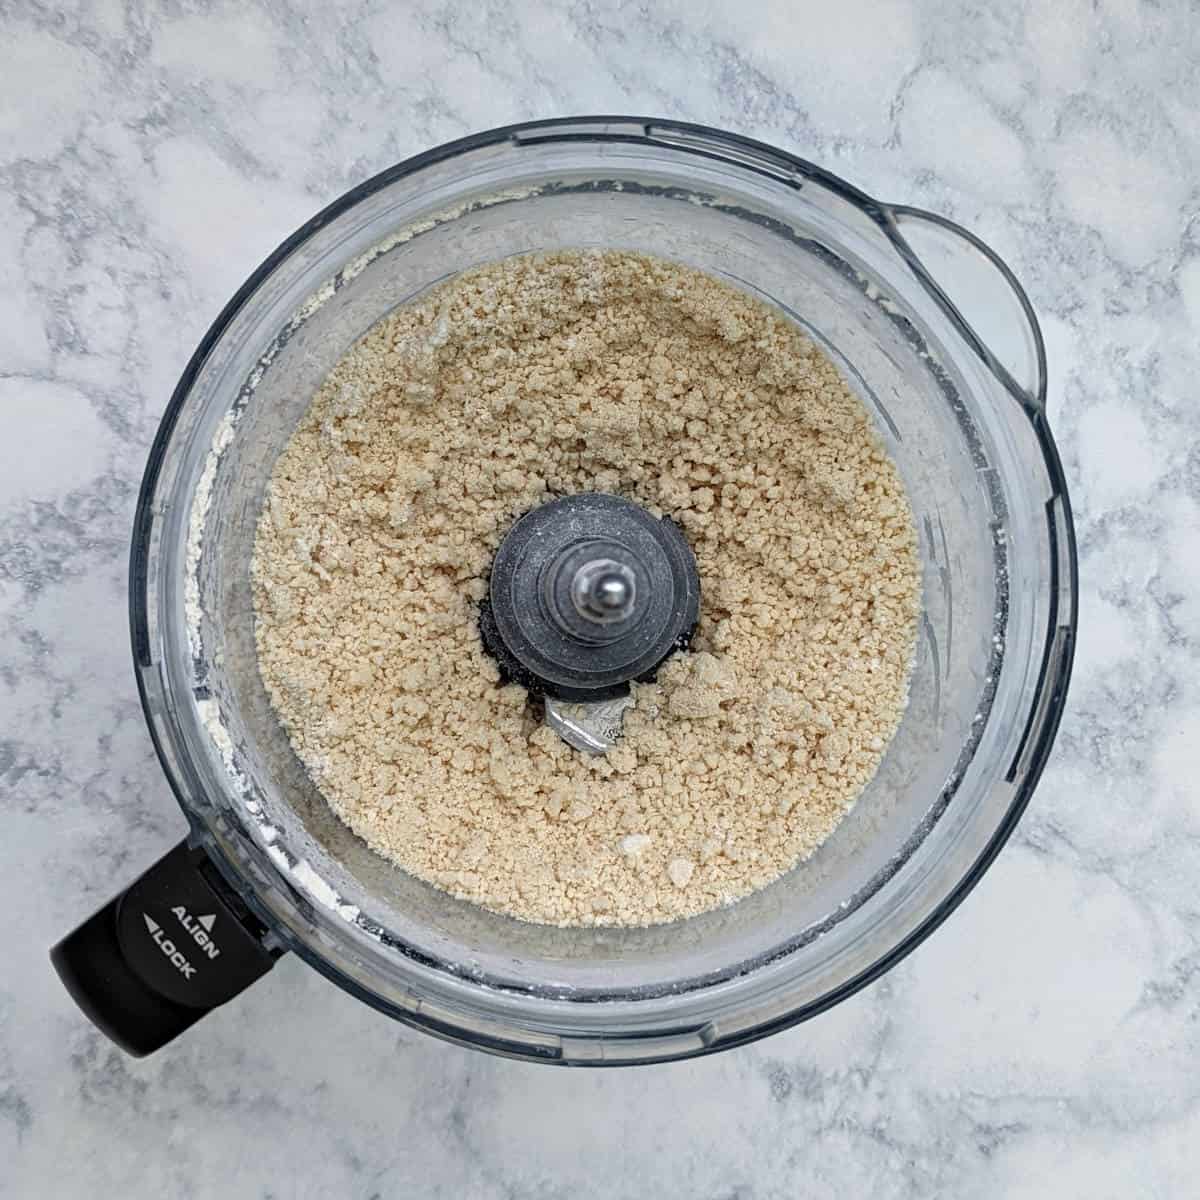 all ingredients for pie crust, blitzed together into crumbles, in a food processor